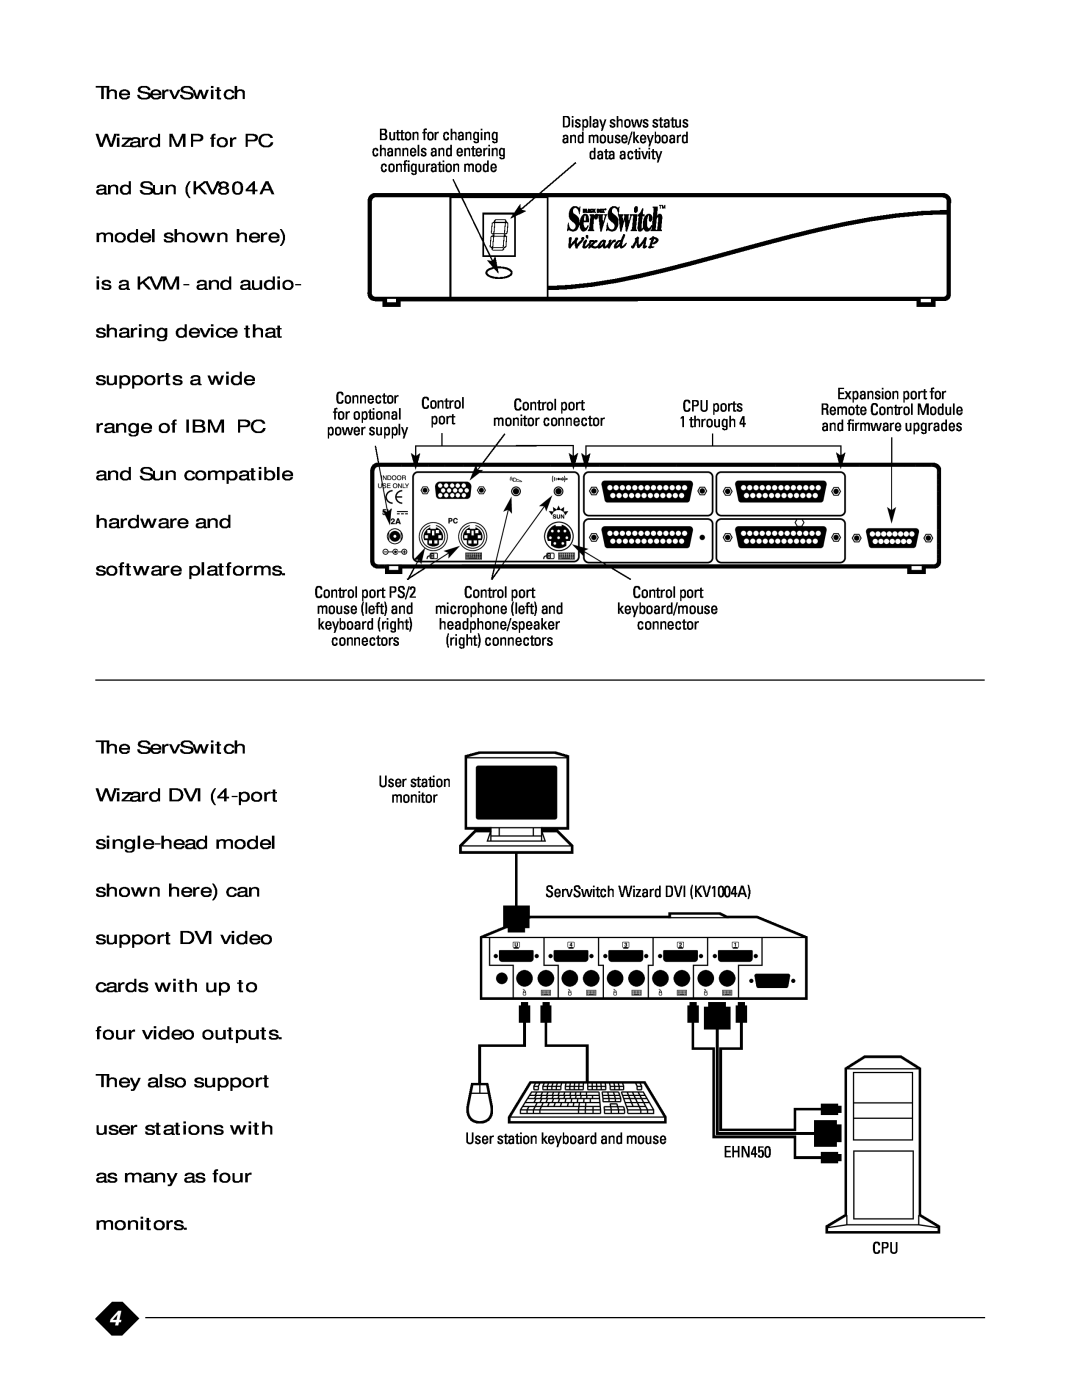 Black Box SW651ASW652A User station monitor ServSwitch Wizard DVI KV1004A, User station keyboard and mouse EHN450 CPU 